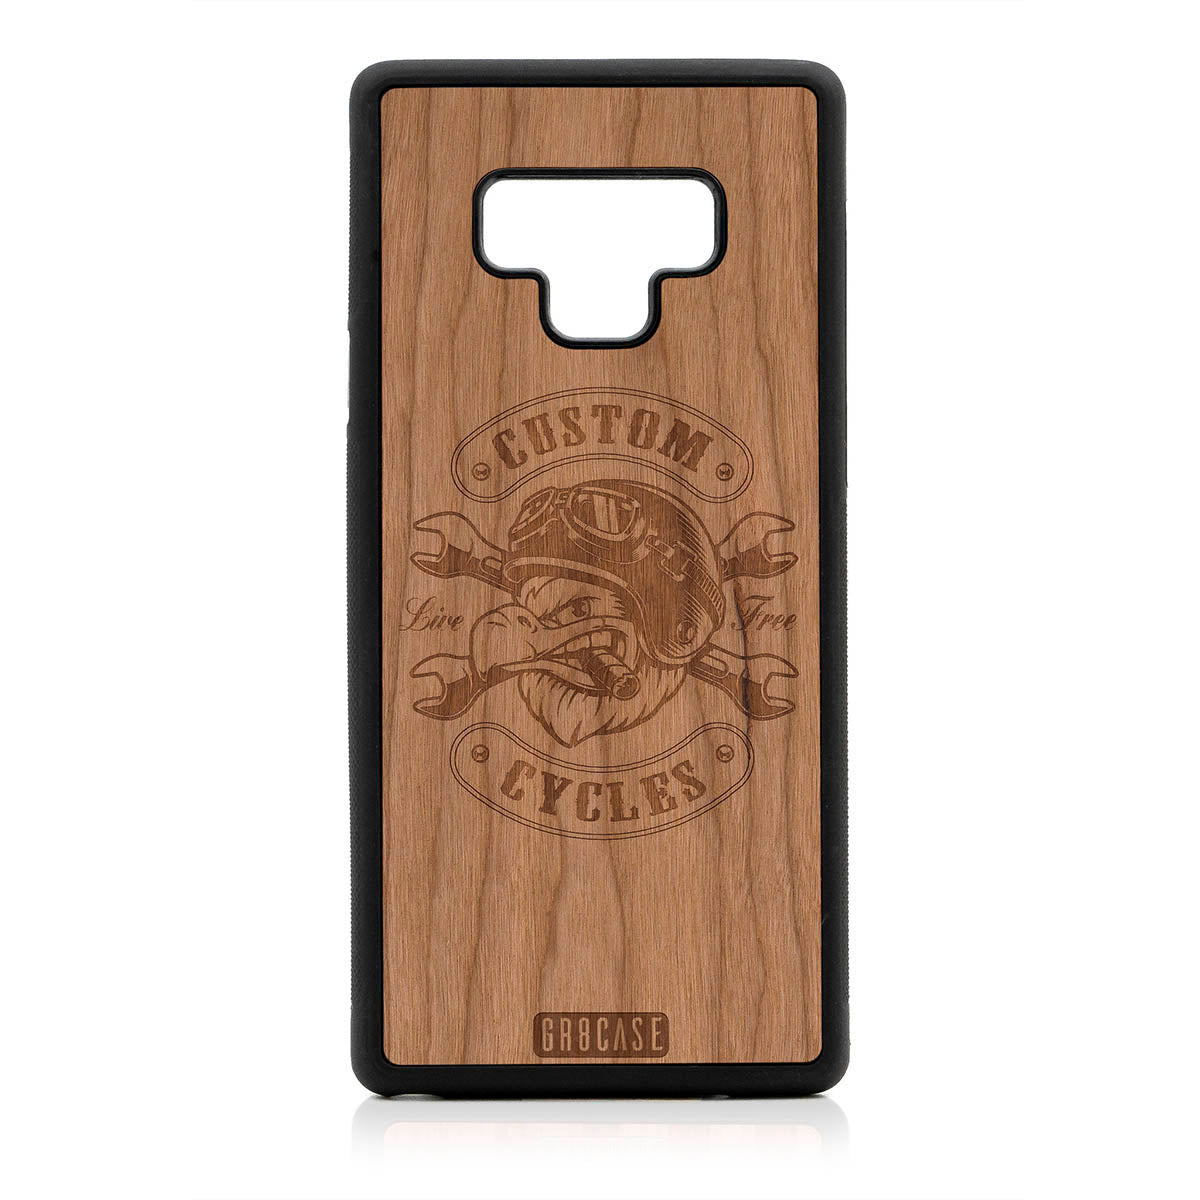 Custom Cycles Live Free (Biker Eagle) Design Wood Case For Samsung Galaxy Note 9 by GR8CASE